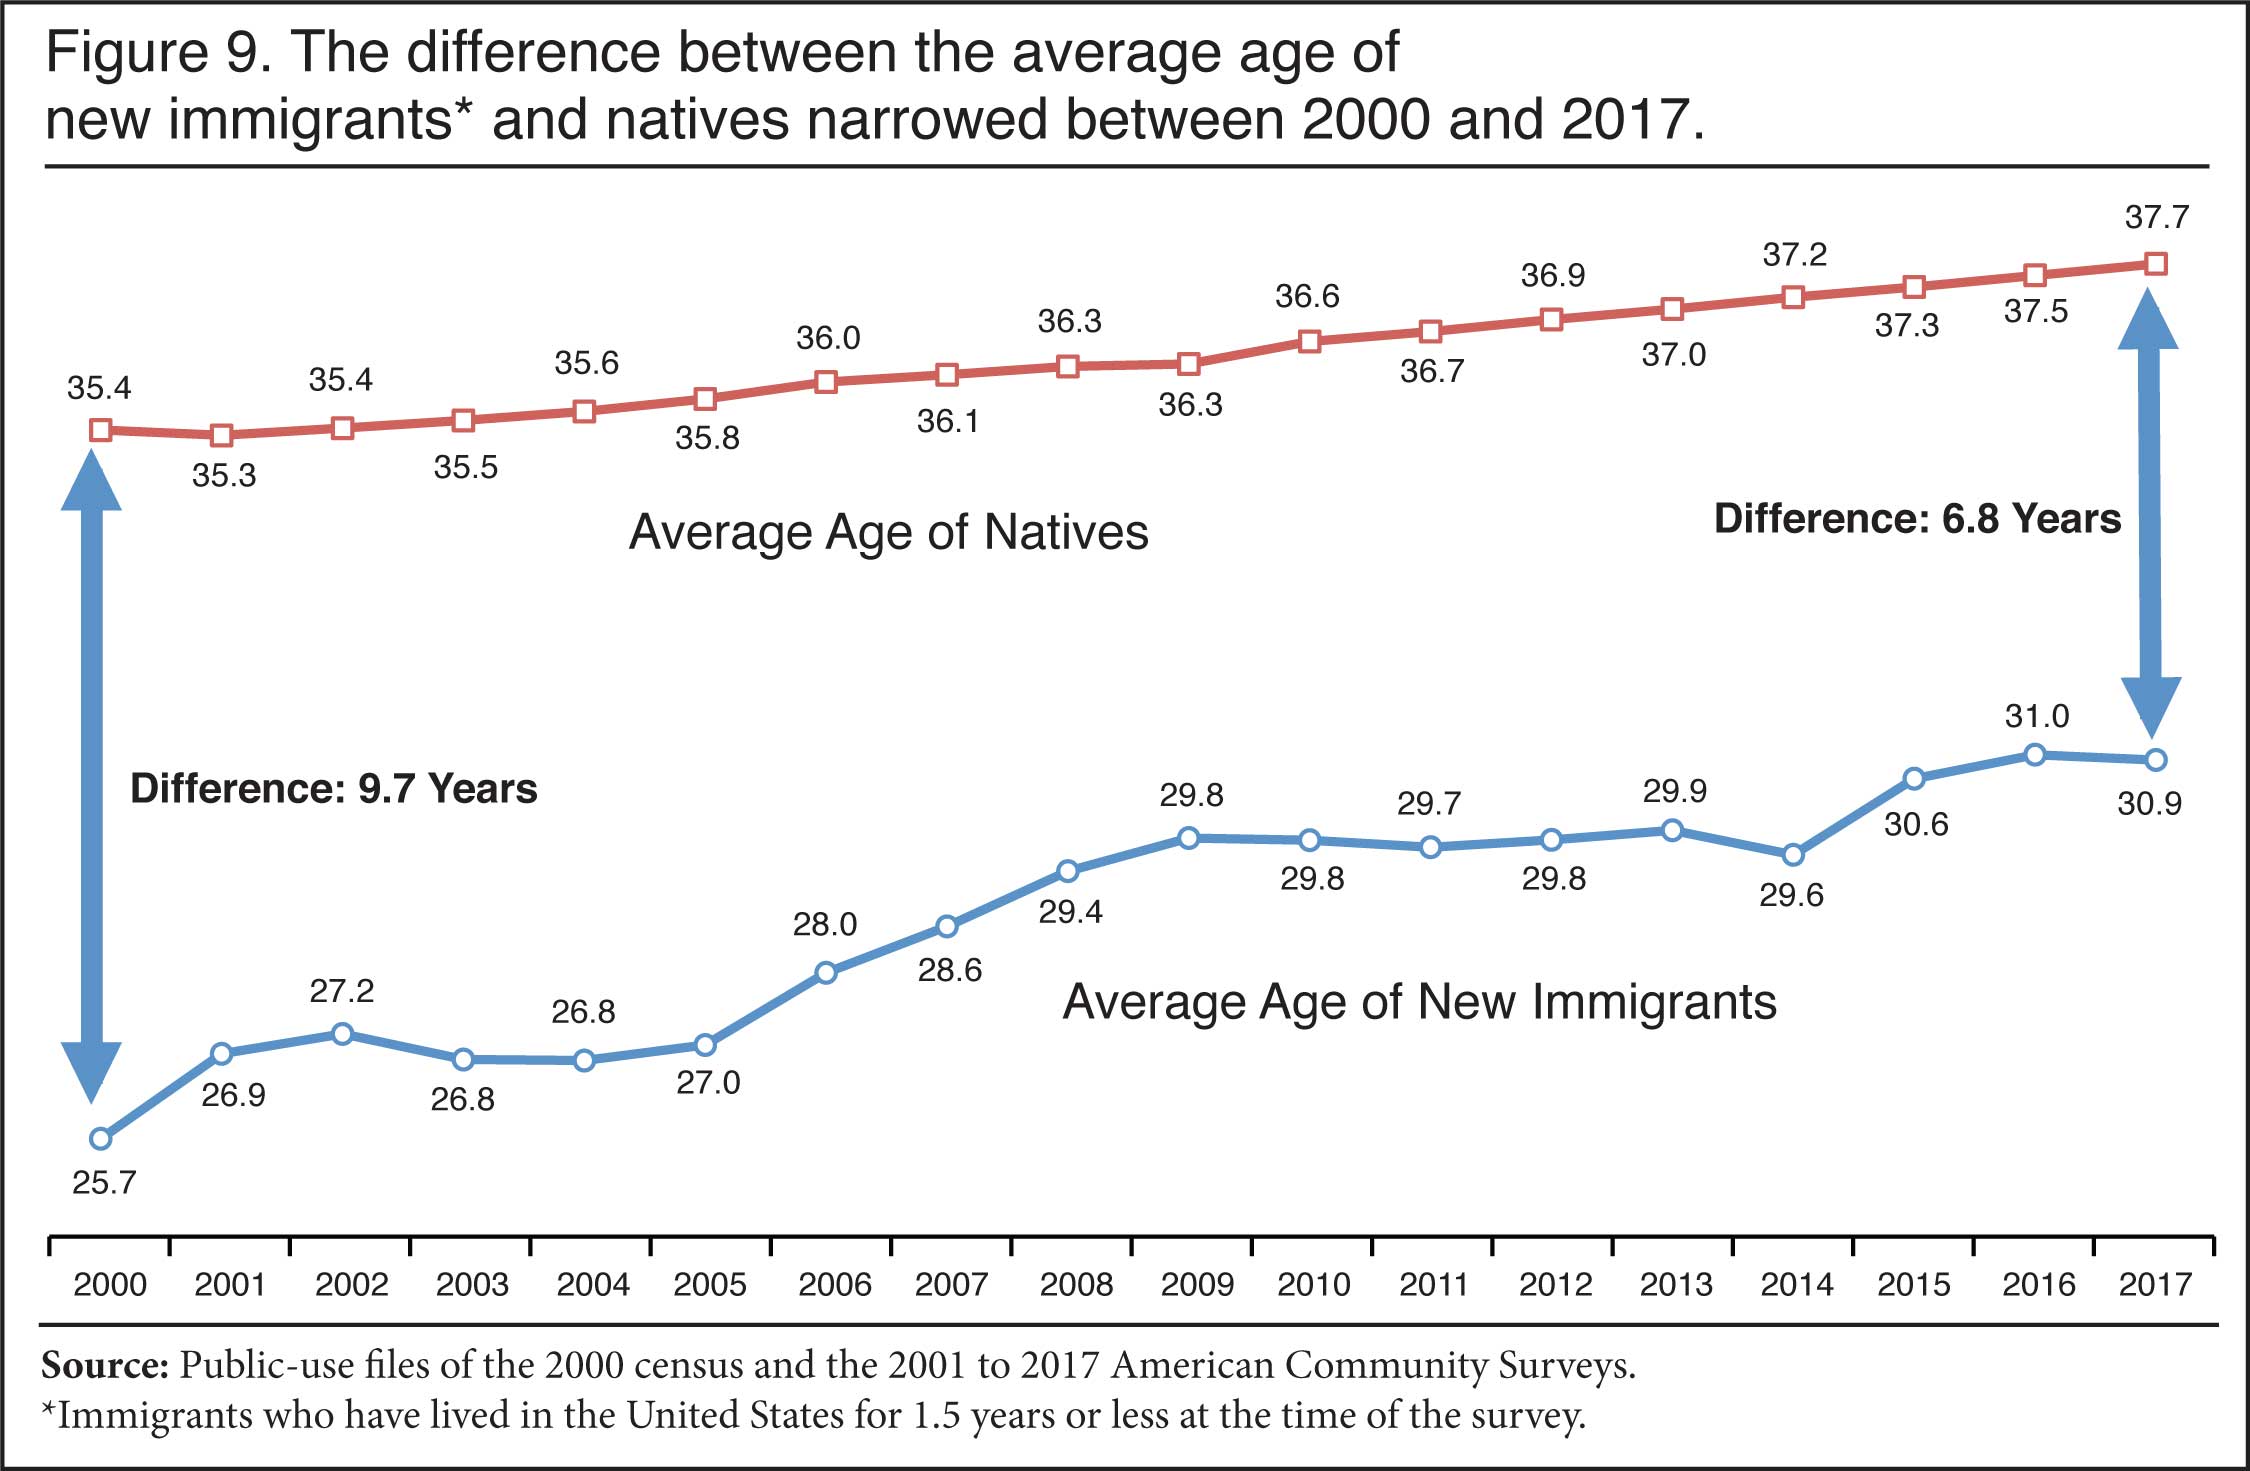 The difference between the average age of new immigrants and natives narrowed between 2000 and 2017